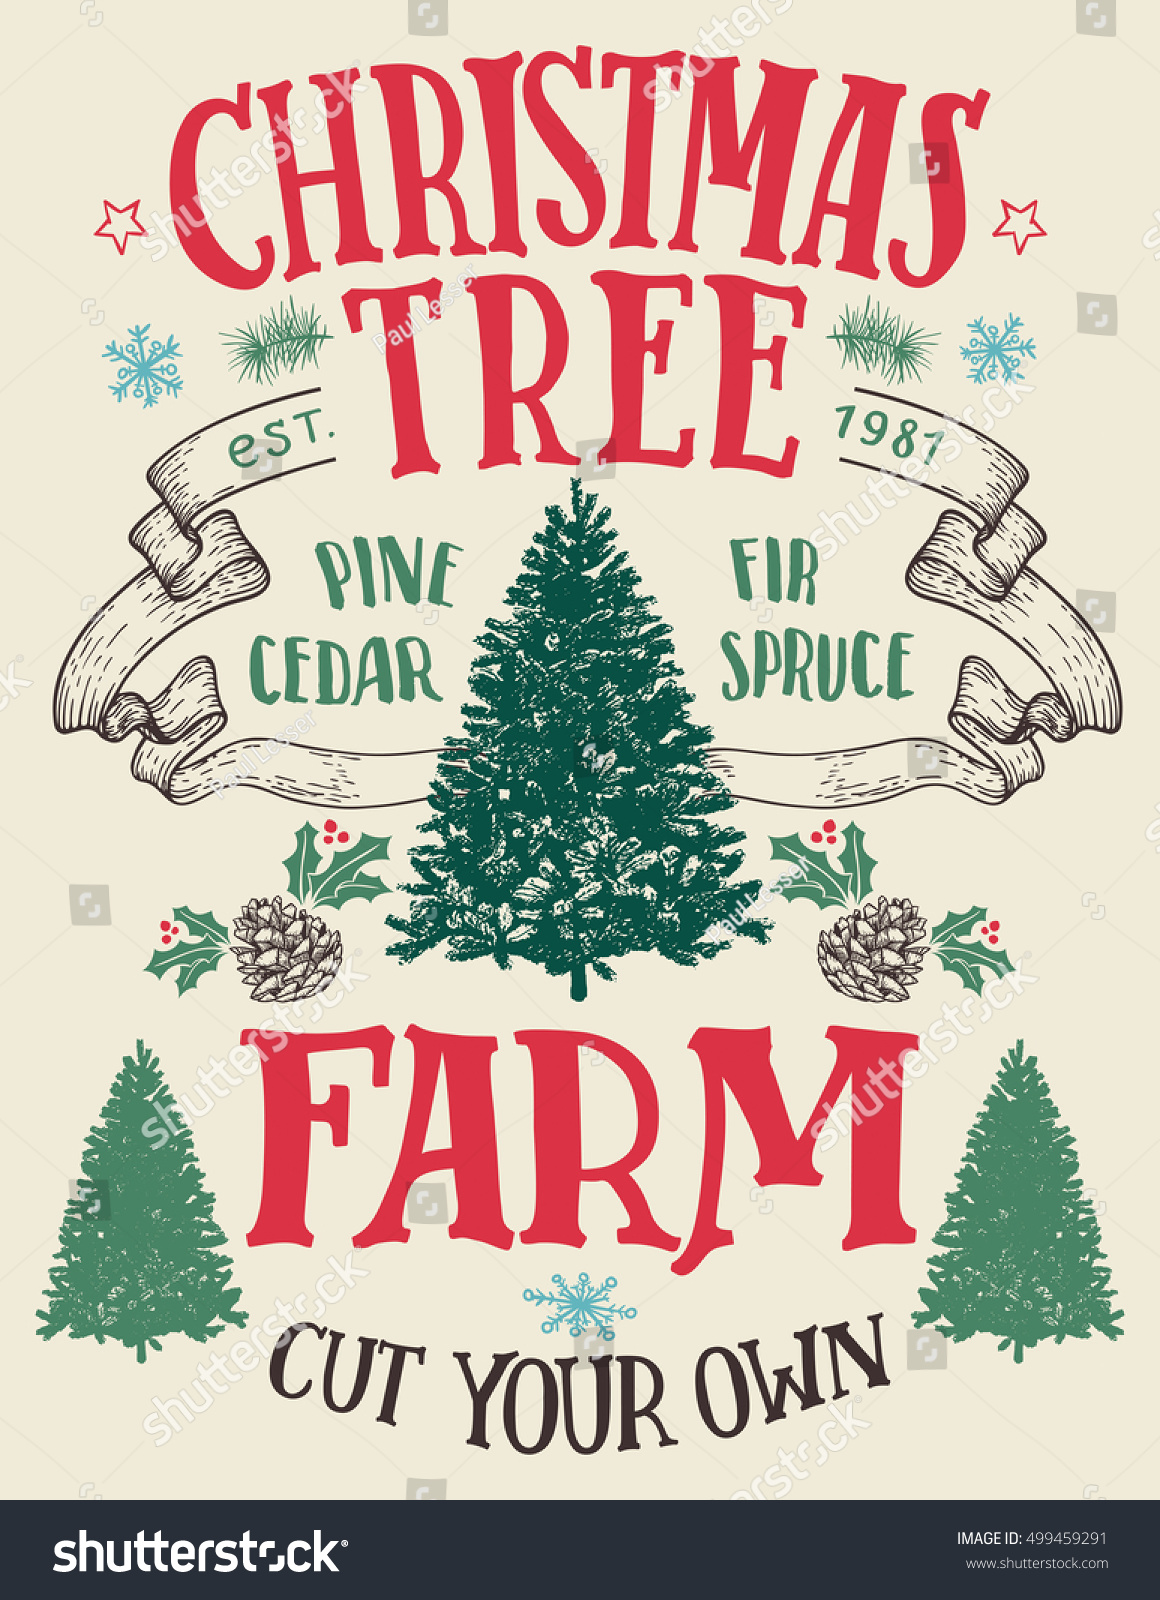 Christmas Tree Farm Cut Your Own Stock Vector 499459291 - Shutterstock